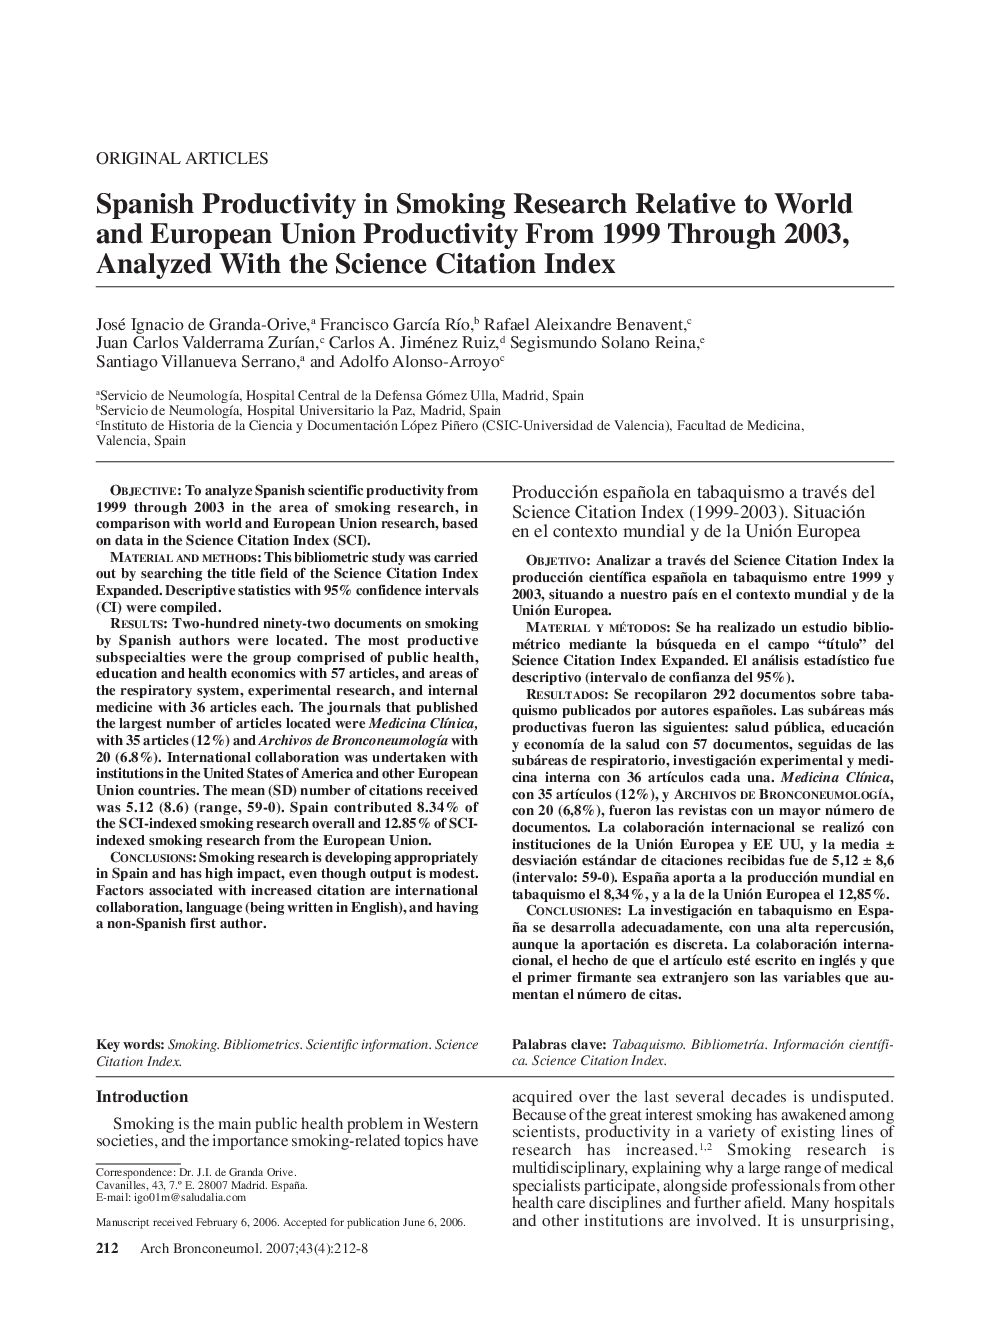 Spanish Productivity in Smoking Research Relative to World and European Union Productivity From 1999 Through 2003, Analyzed With the Science Citation Index